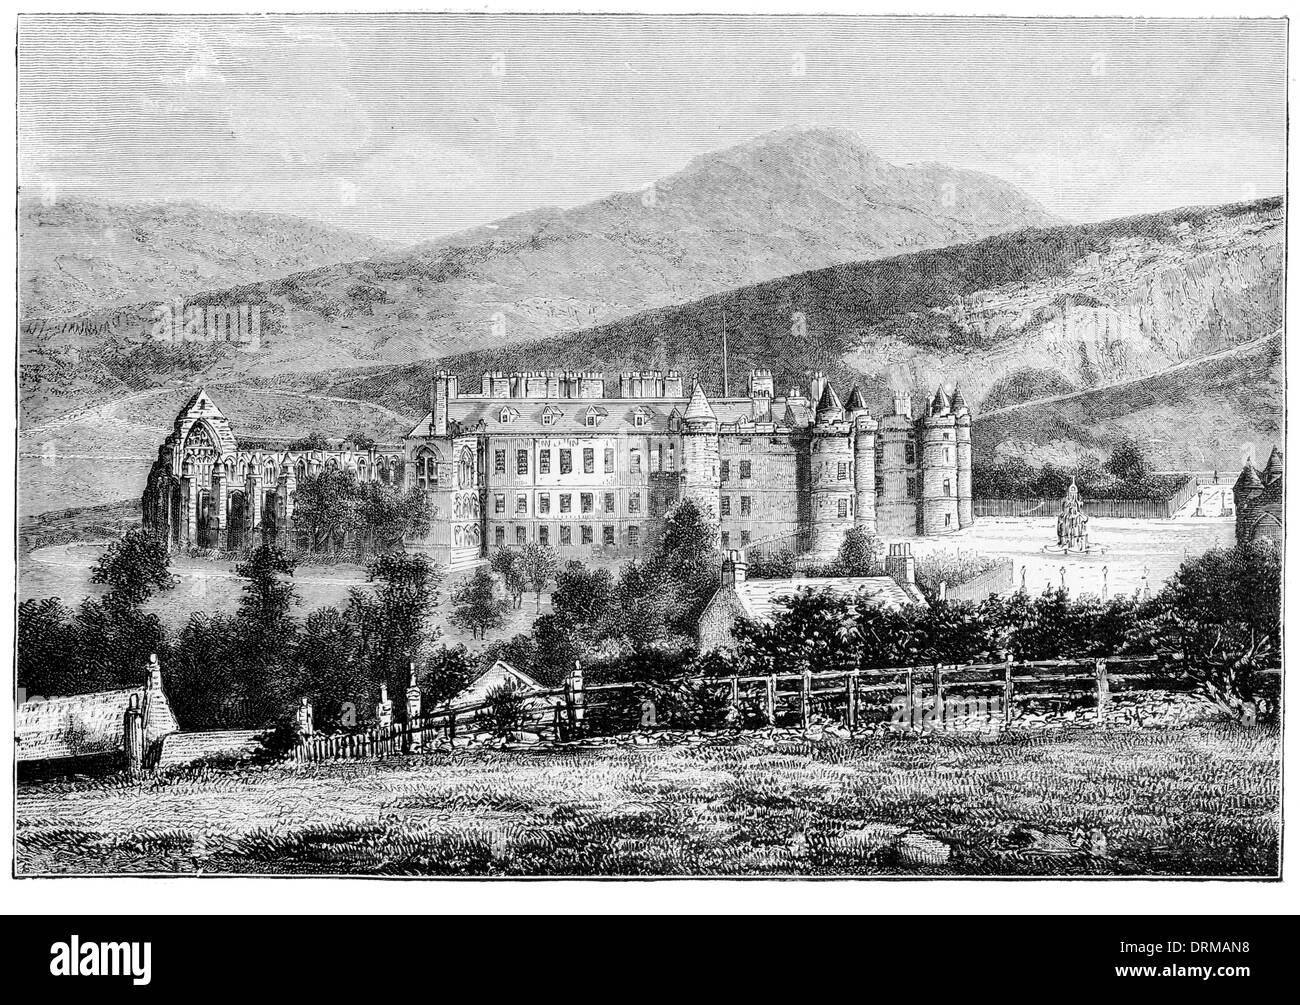 Palace of Holyroodhouse, gemeinhin als Holyrood Palace. In der Ferne ist Arthurs Seat. um 1880 Stockfoto